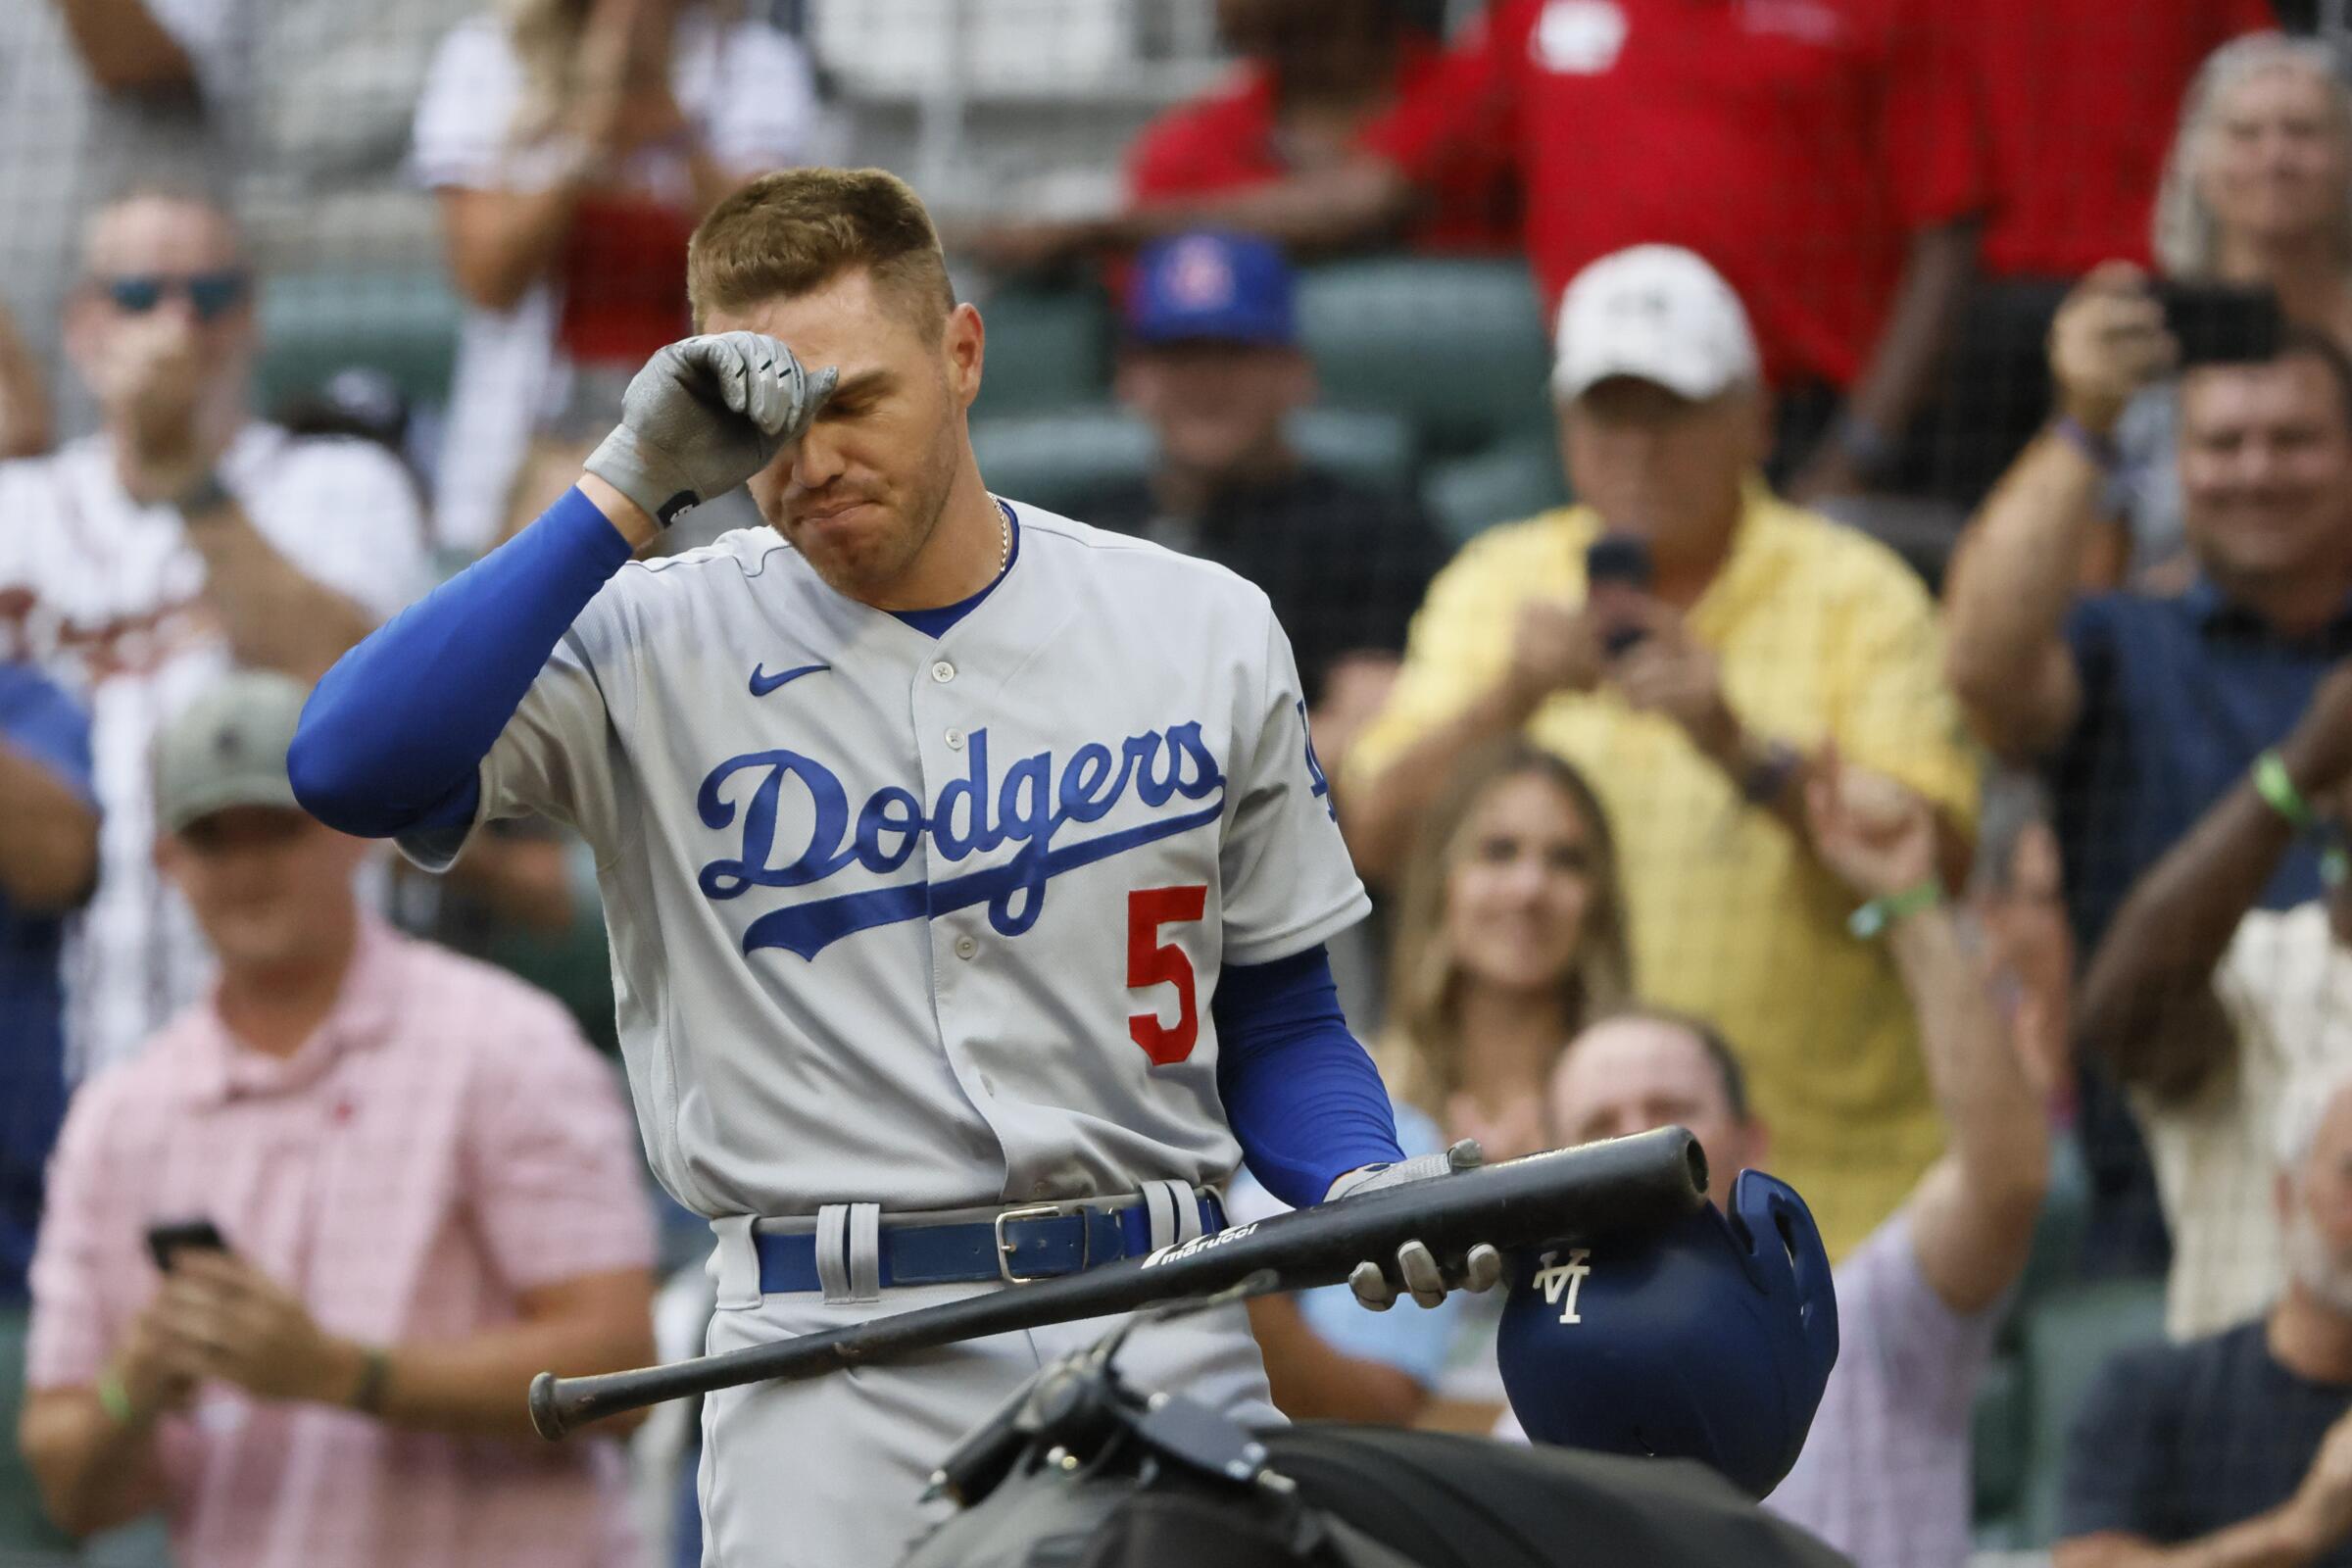 Dodgers star Freddie Freeman reacts to a standing ovation during his first at-bat against the Atlanta Braves.